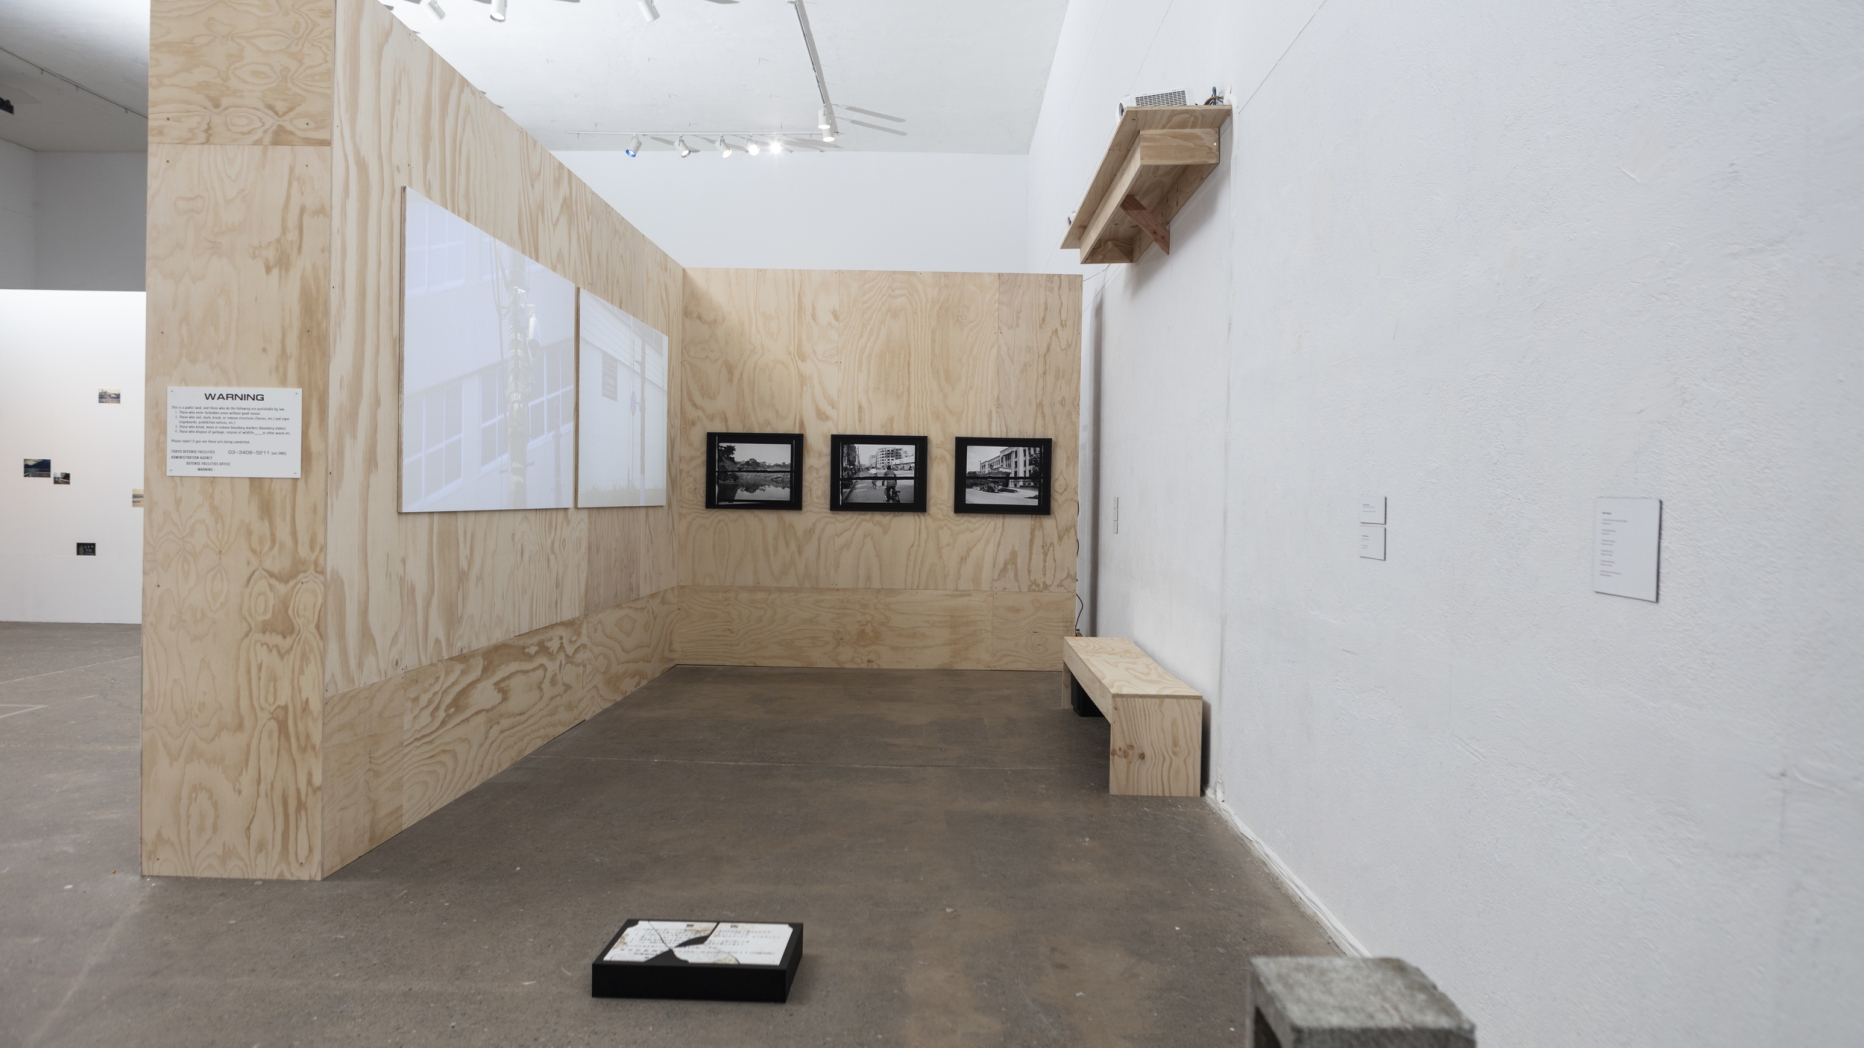 Gallery space with alcove made of plywood. Photographs are hung on wall and there is a bench to sit and view them